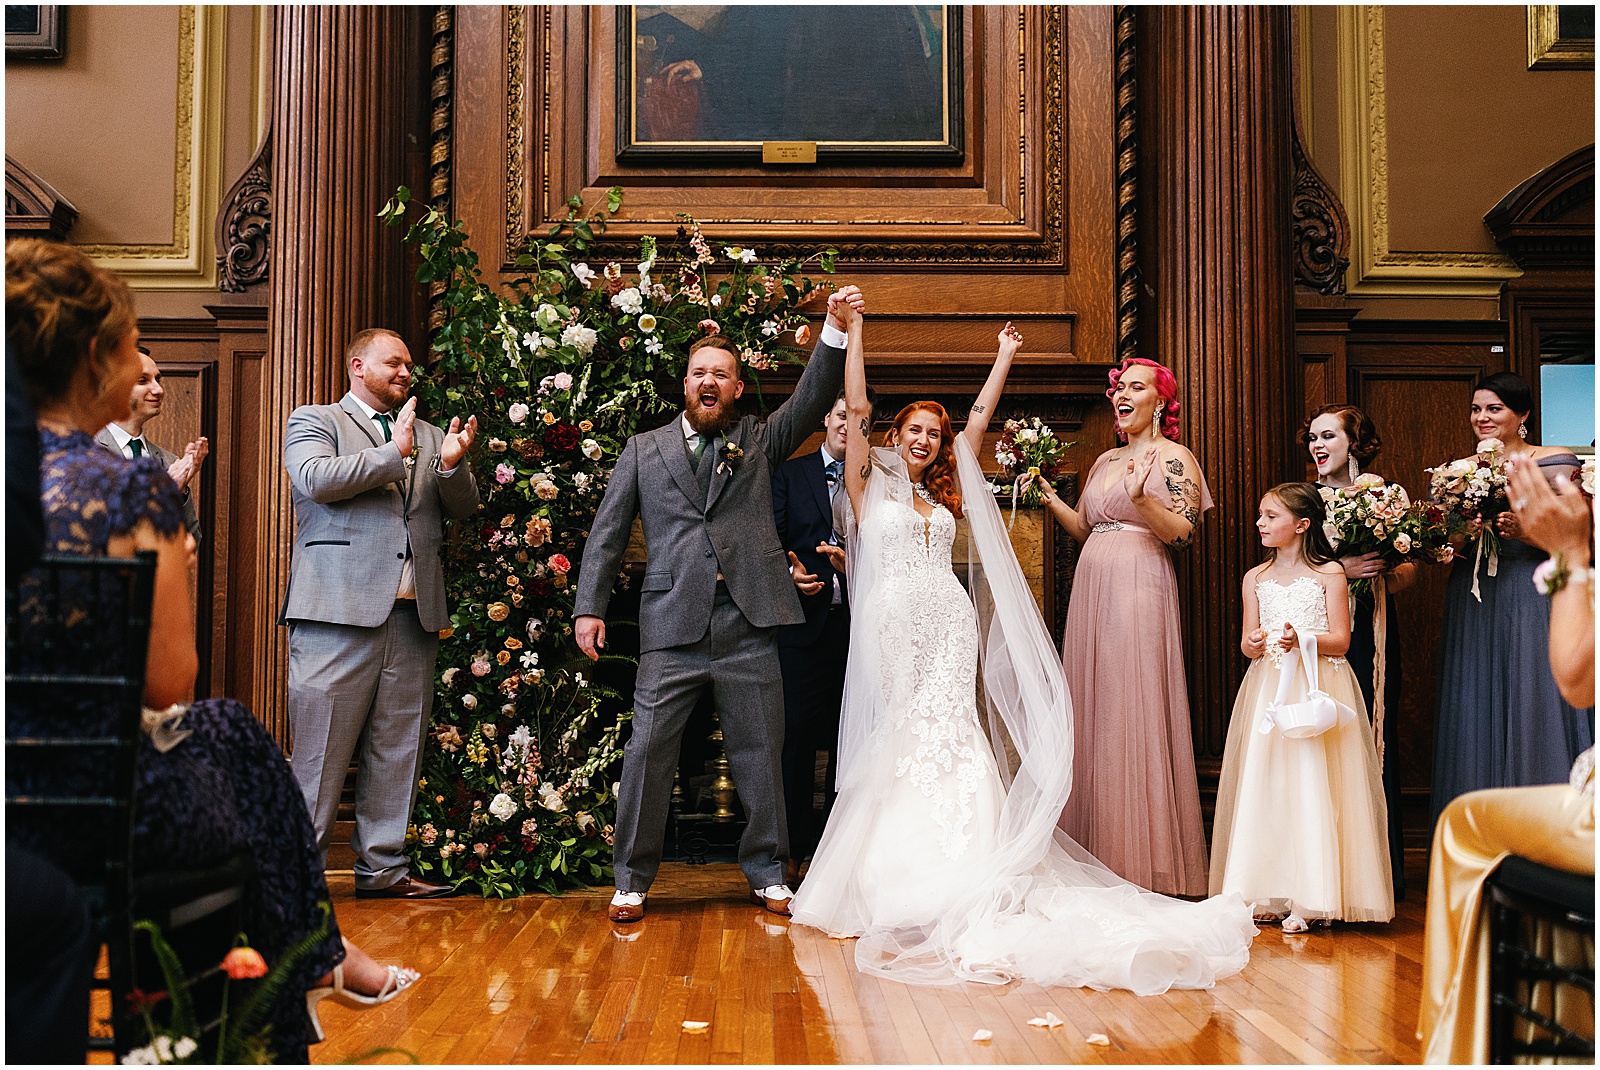 A bride and groom raise their hands in celebration after their Mutter Museum wedding ceremony.